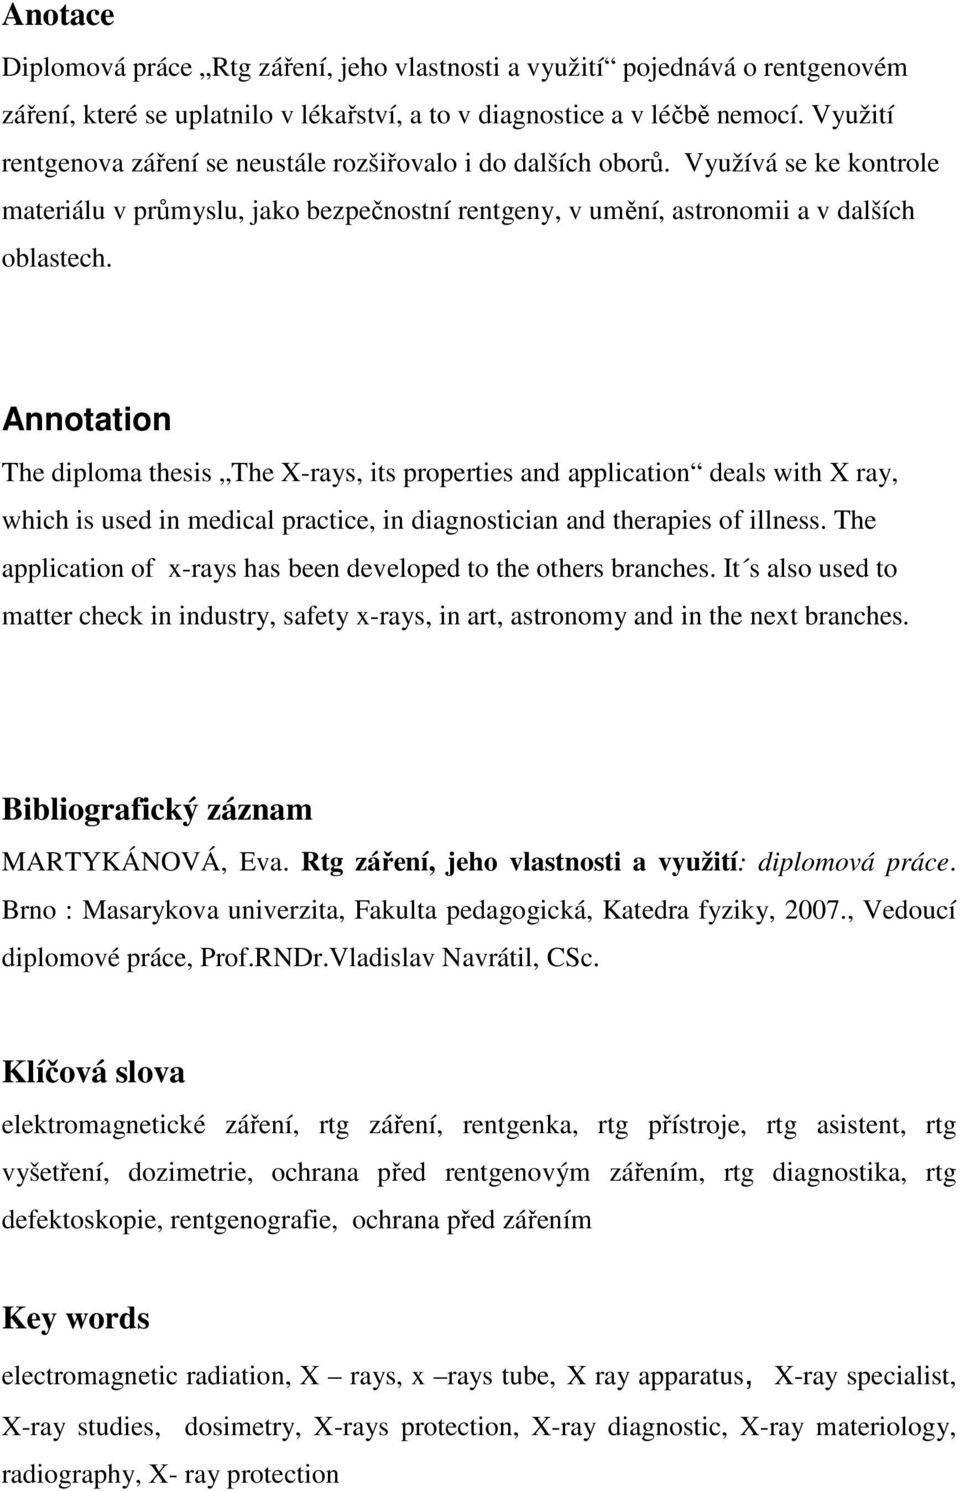 Annotation The diploma thesis The X-rays, its properties and application deals with X ray, which is used in medical practice, in diagnostician and therapies of illness.